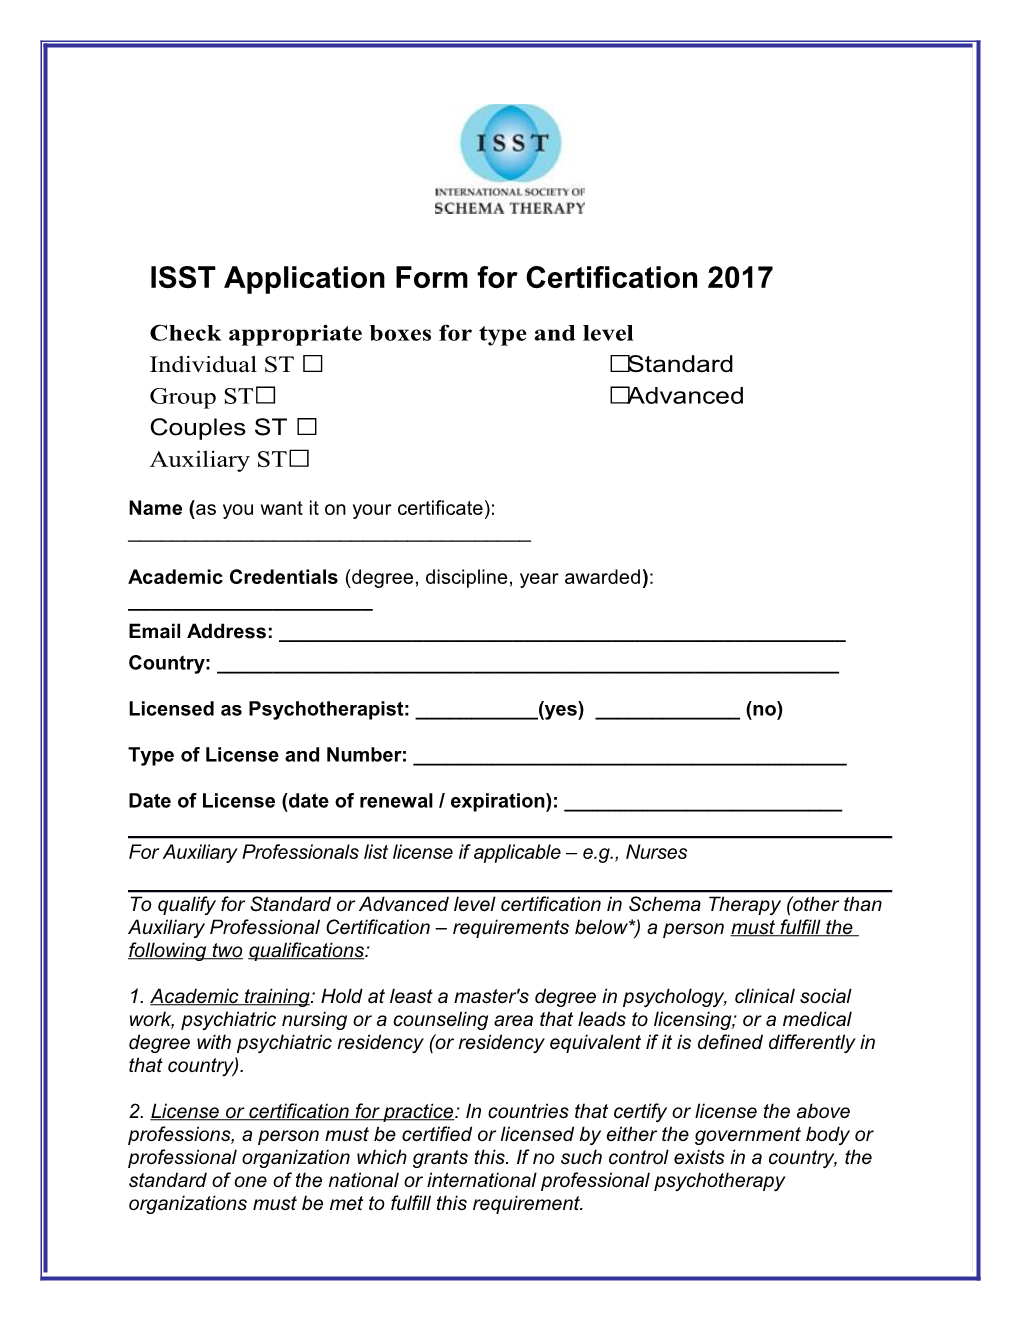 ISST Application Form for Certification 2017